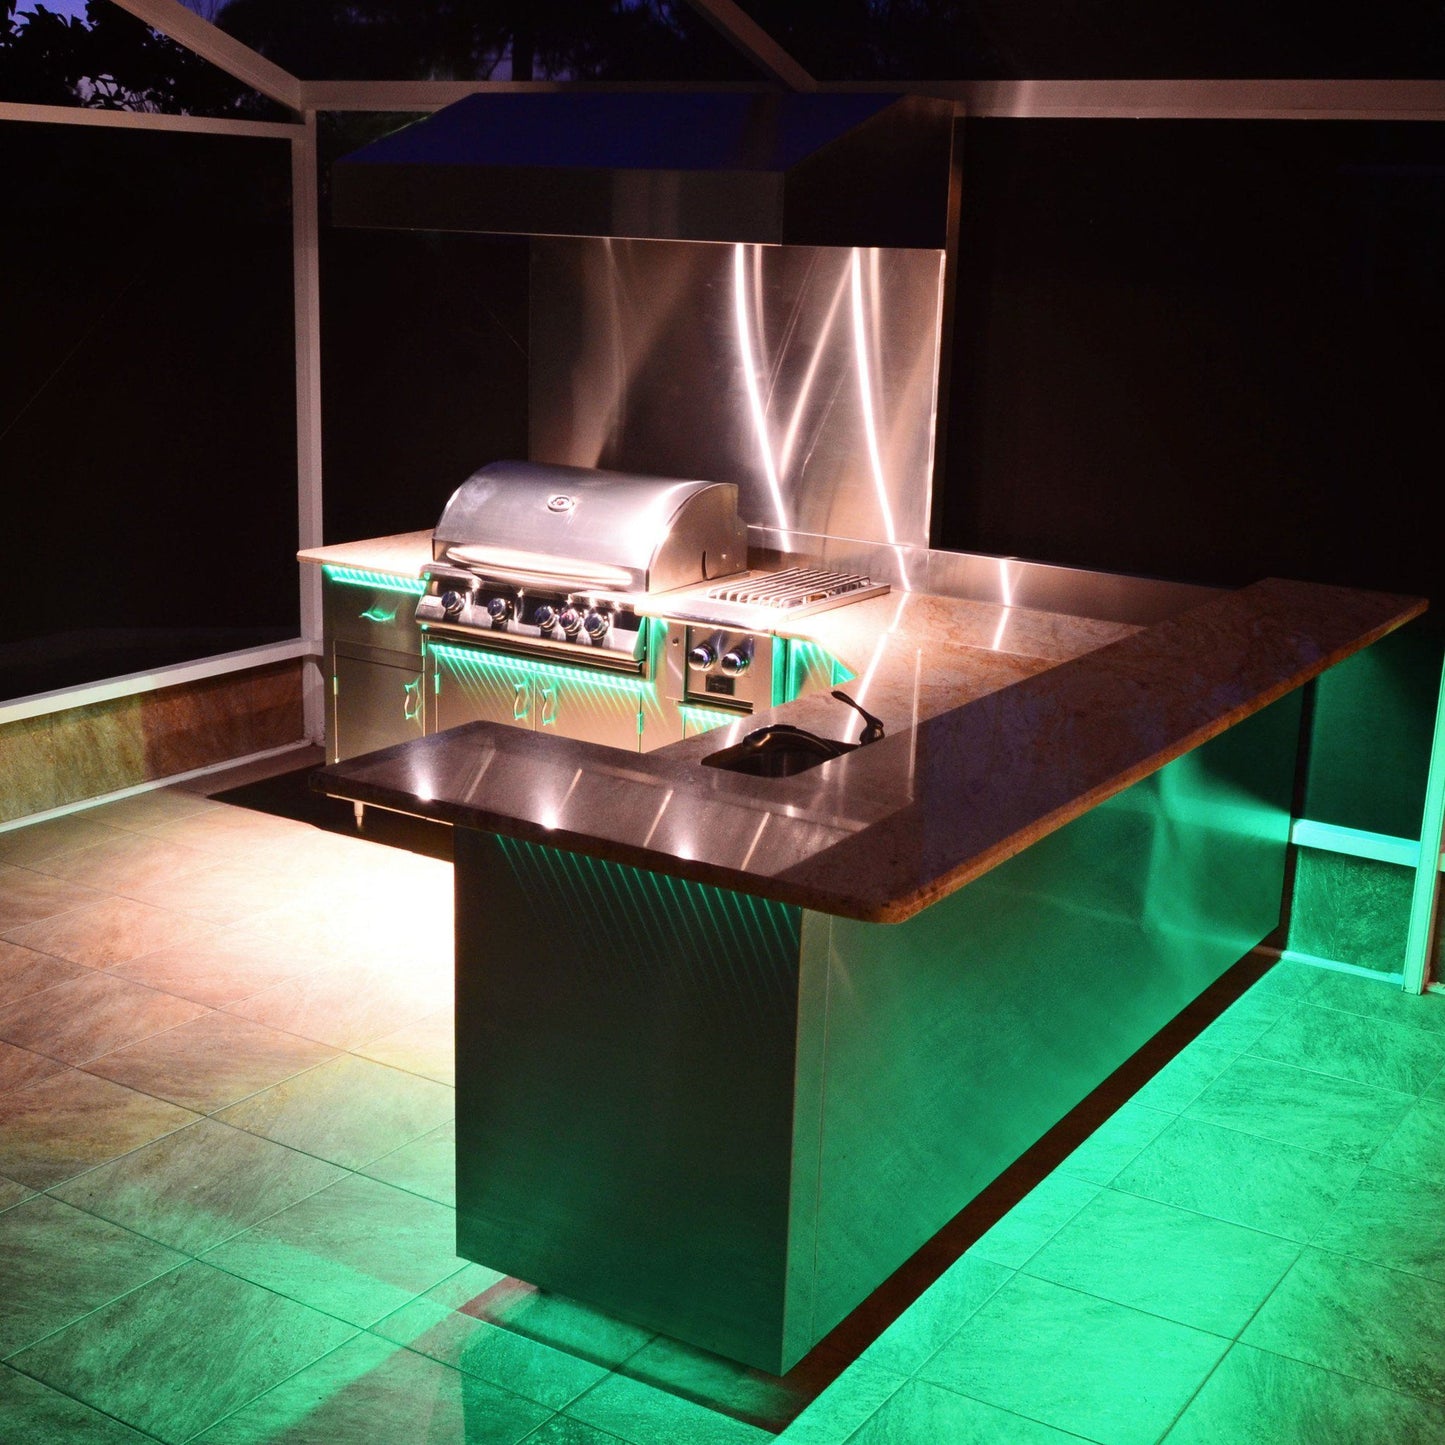 Load image into Gallery viewer, outdoor home bar and grill area illuminated by green light from led strip light installed under bar counter
